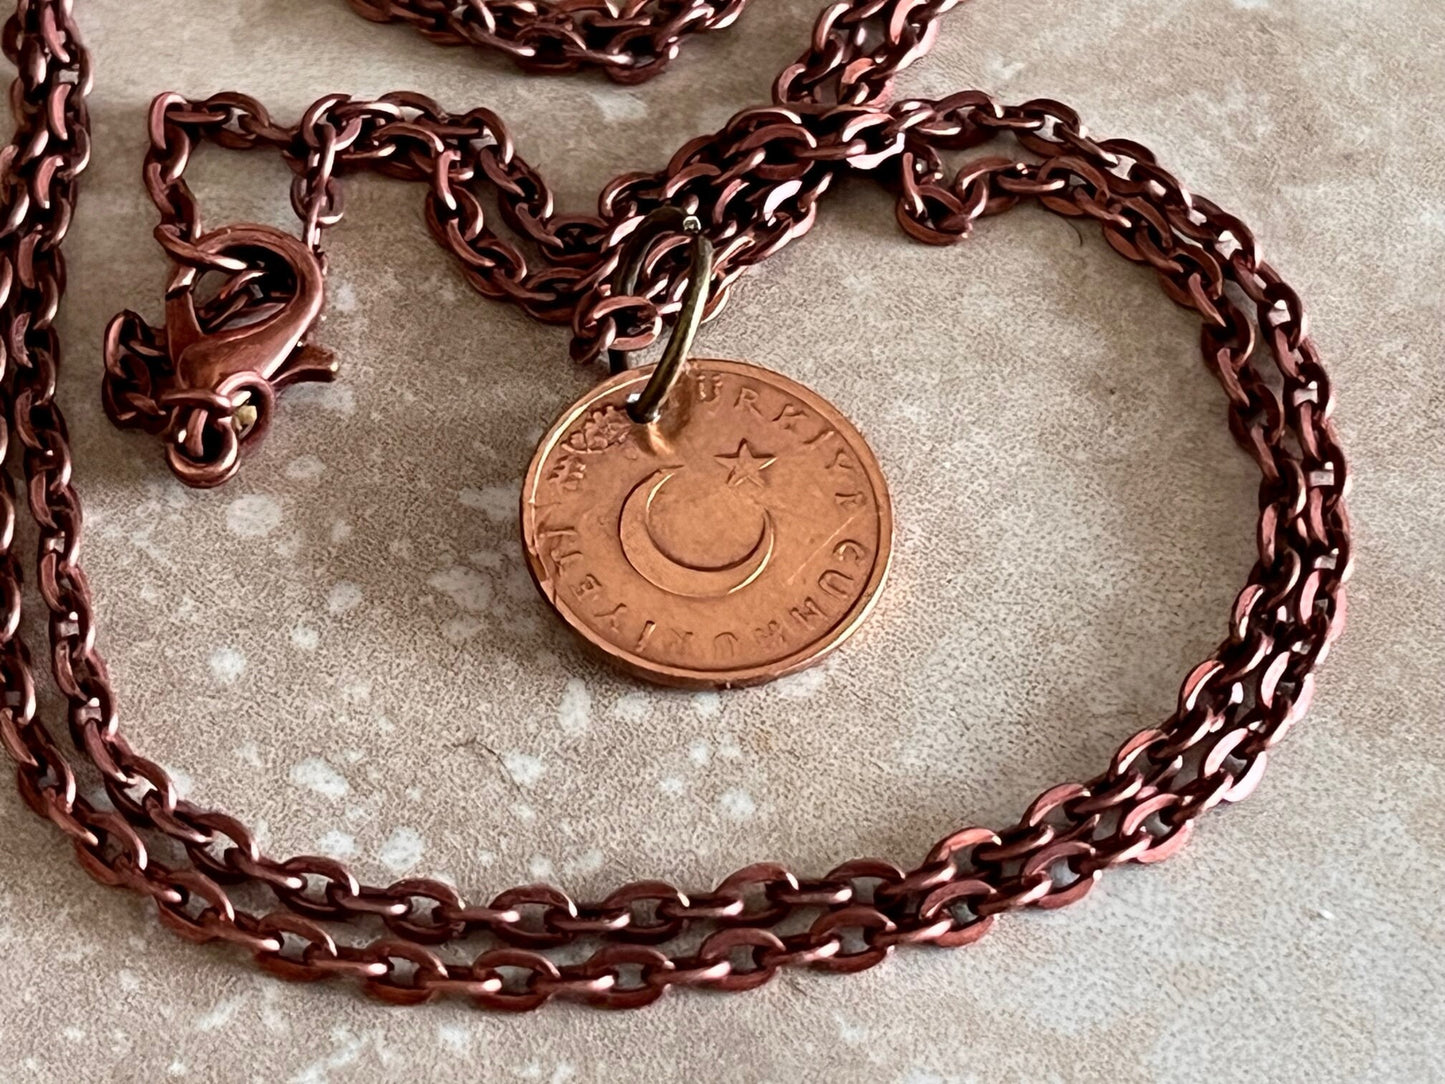 Turkey Coin Turkish 1 Kurus Necklace Pendant Personal Necklace Vintage Handmade Jewelry Gift Friend Charm For Him Her World Coin Collector